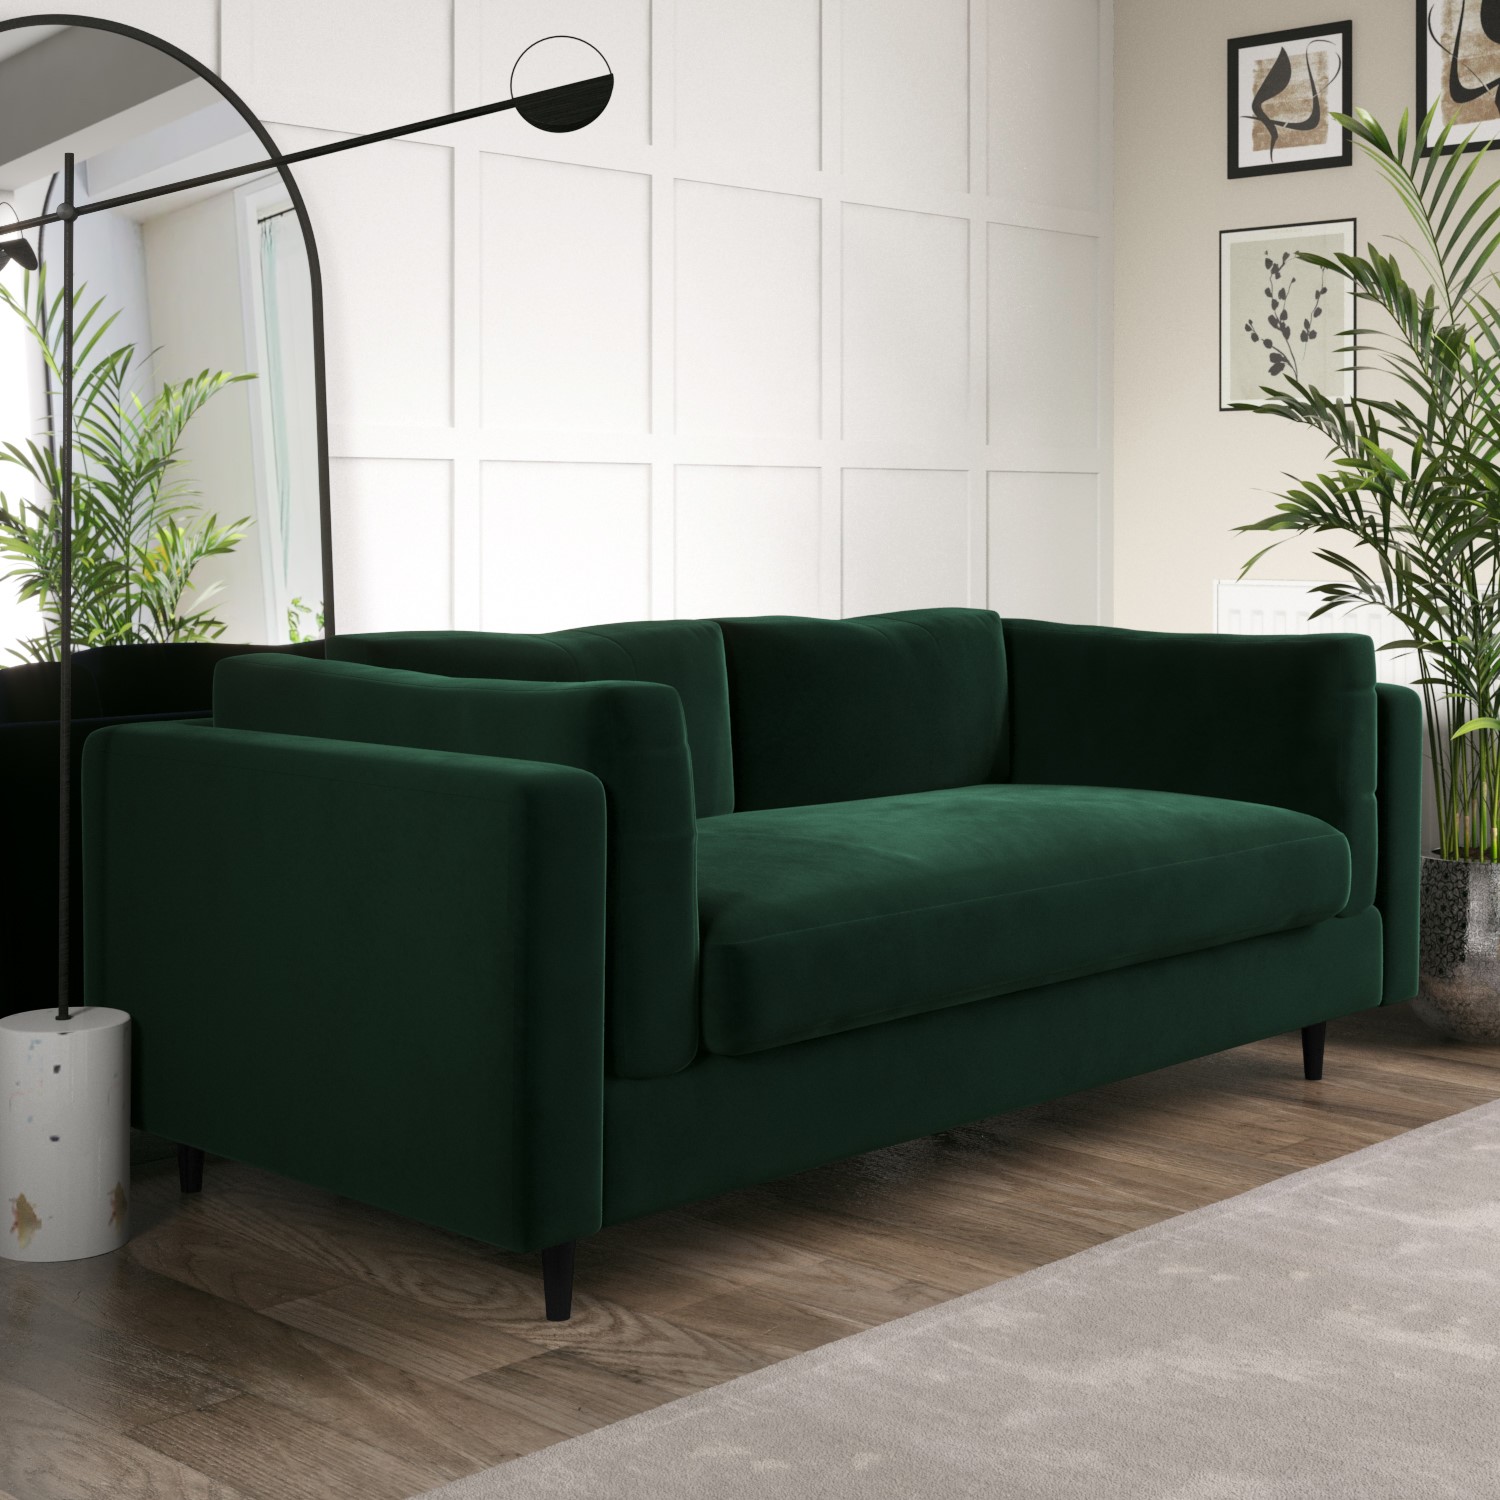 Read more about Green velvet 3 seater flat packed sofa frankie